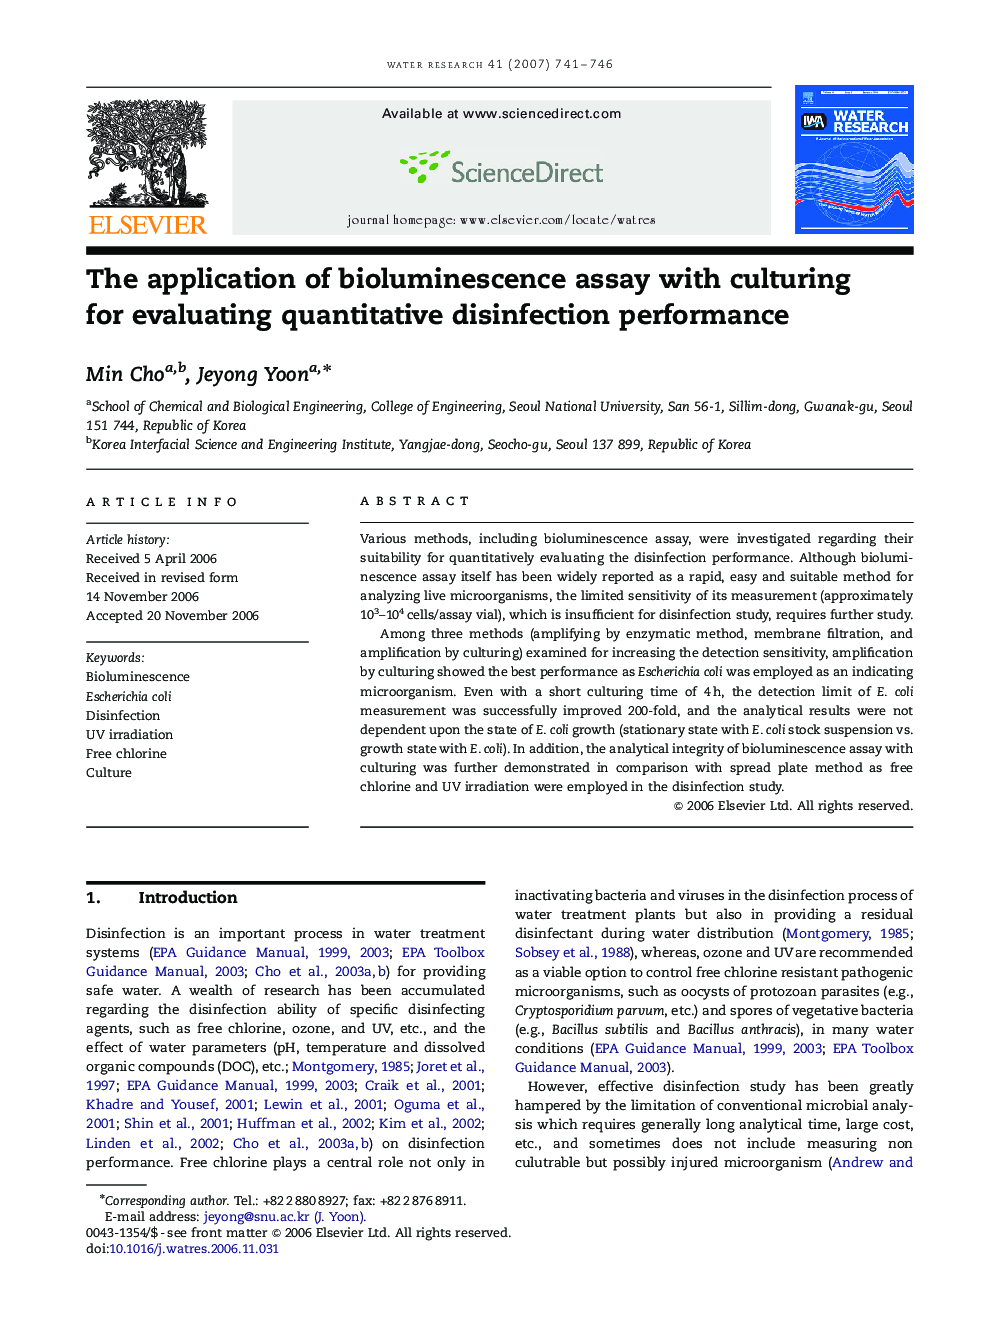 The application of bioluminescence assay with culturing for evaluating quantitative disinfection performance